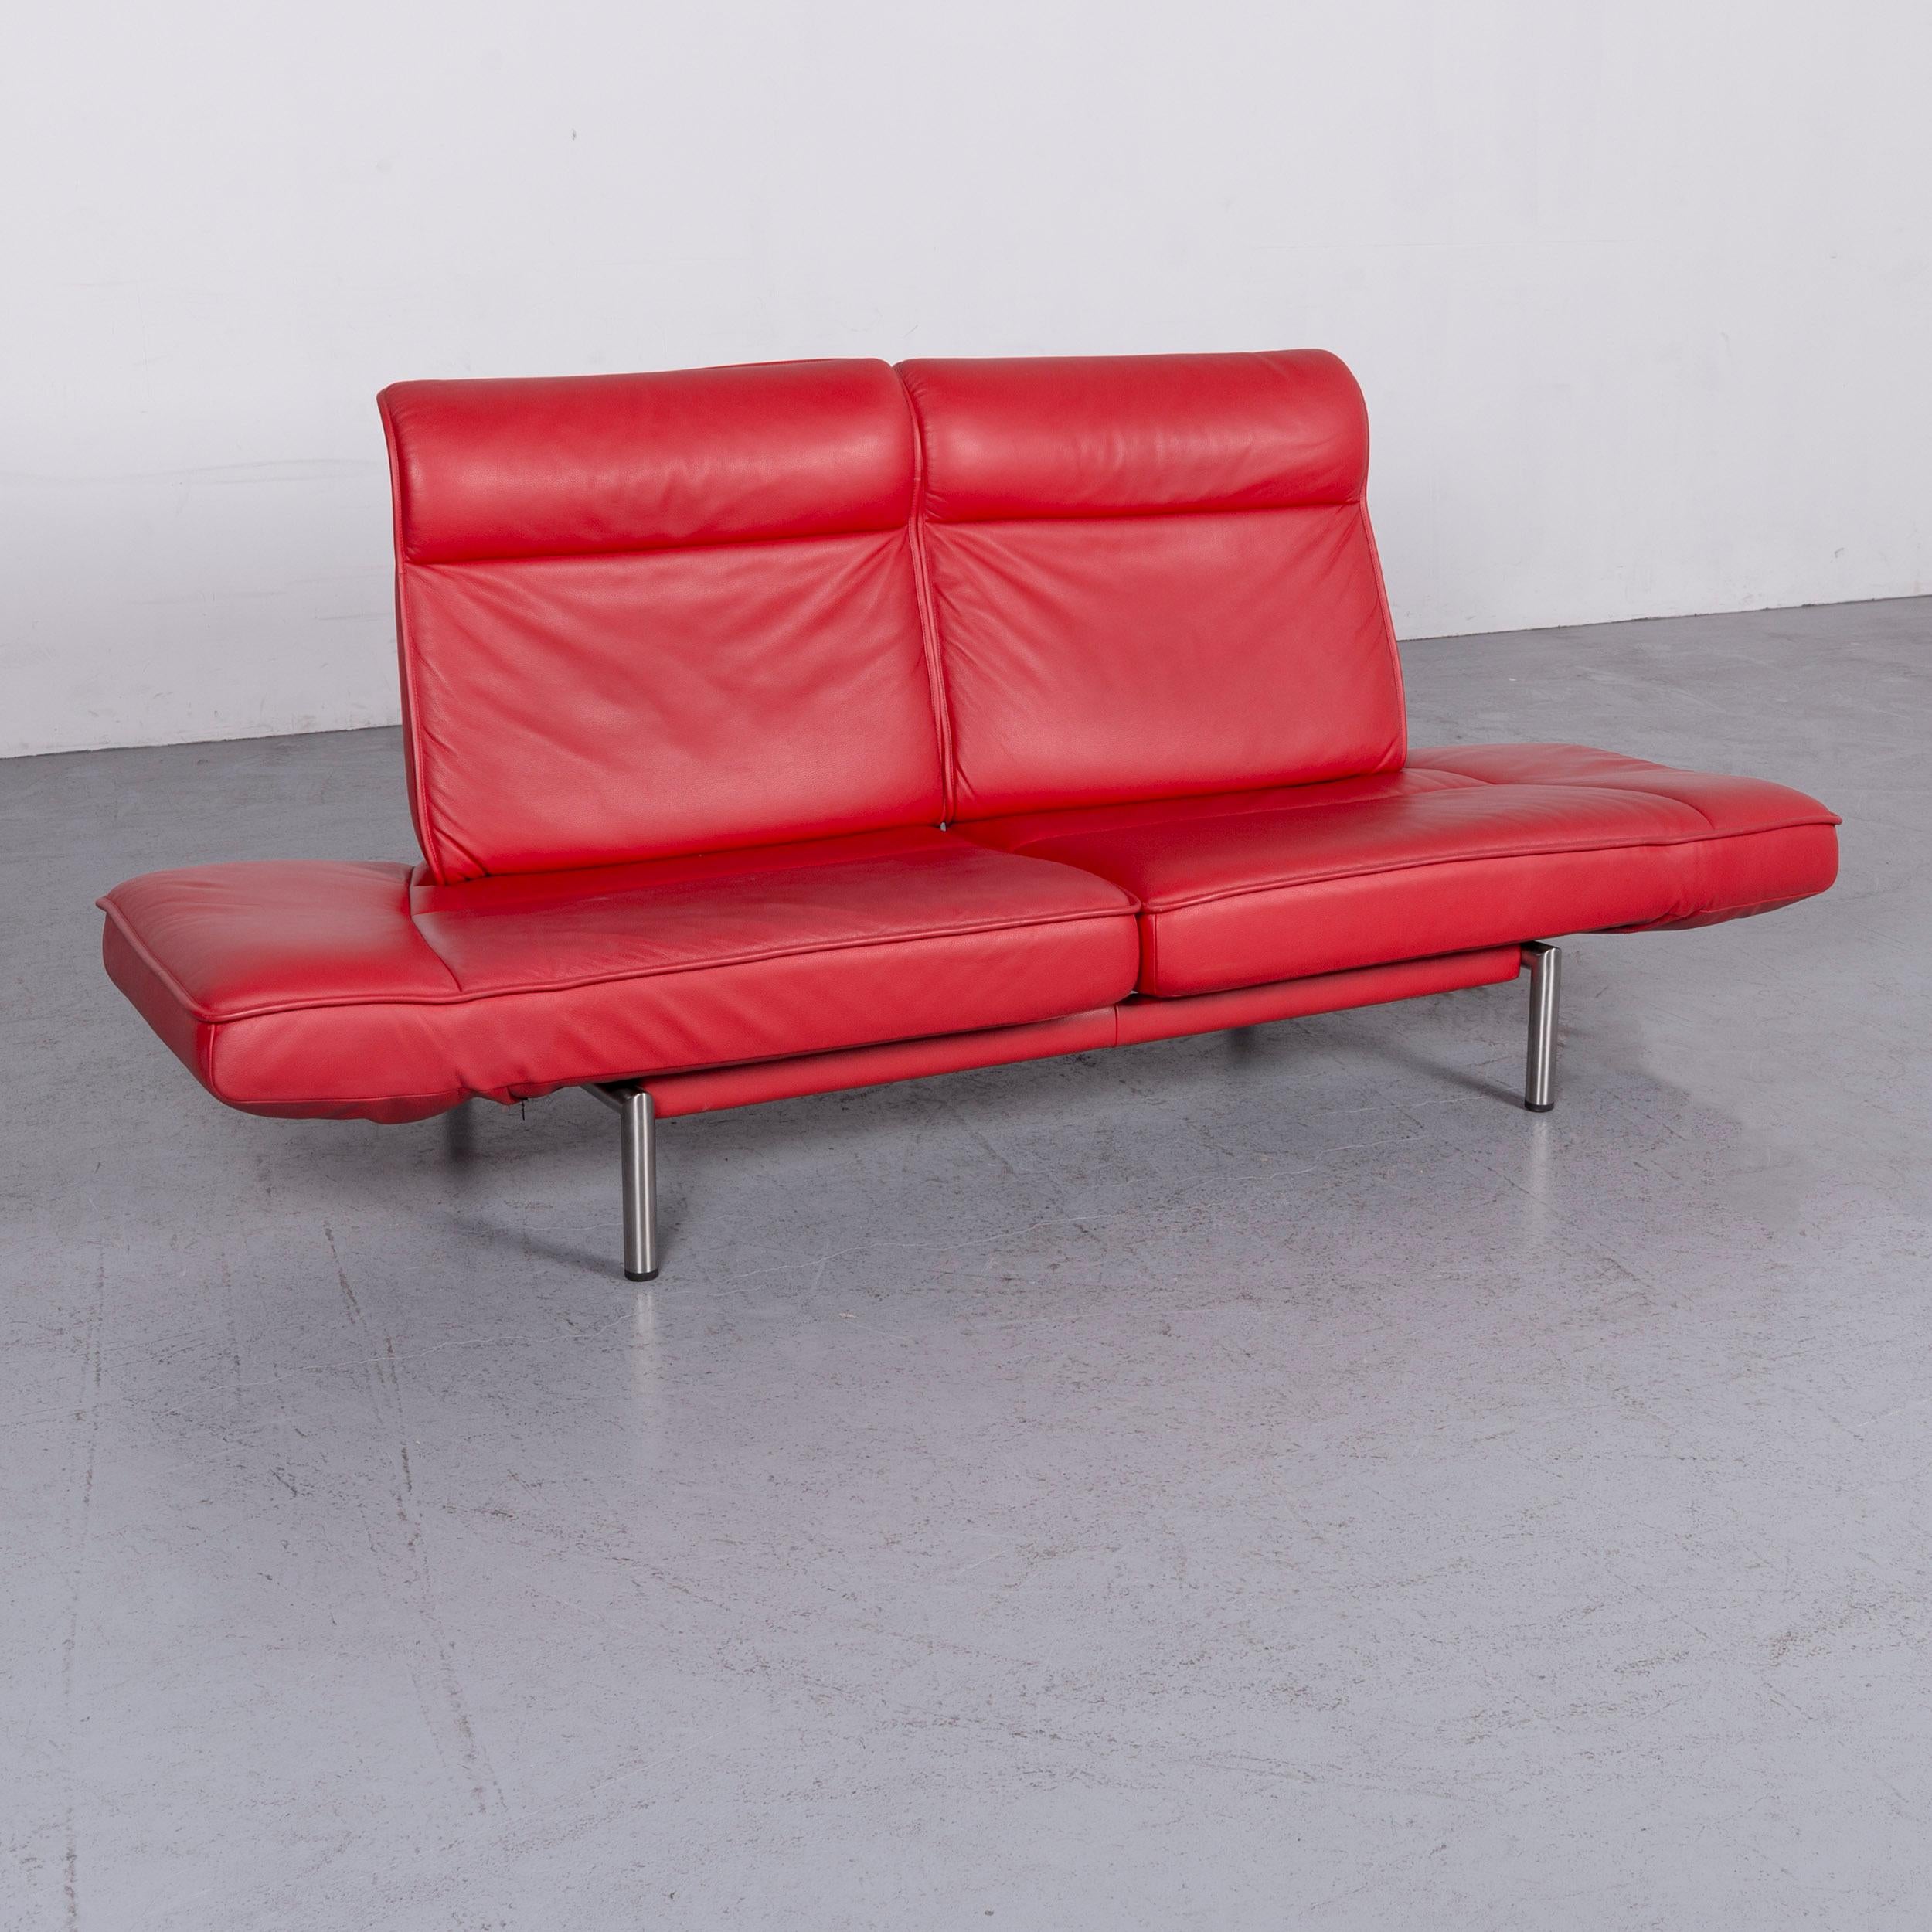 We bring to you a De Sede DS 450 designer sofa red leather three-seat couch made in Switzerland.